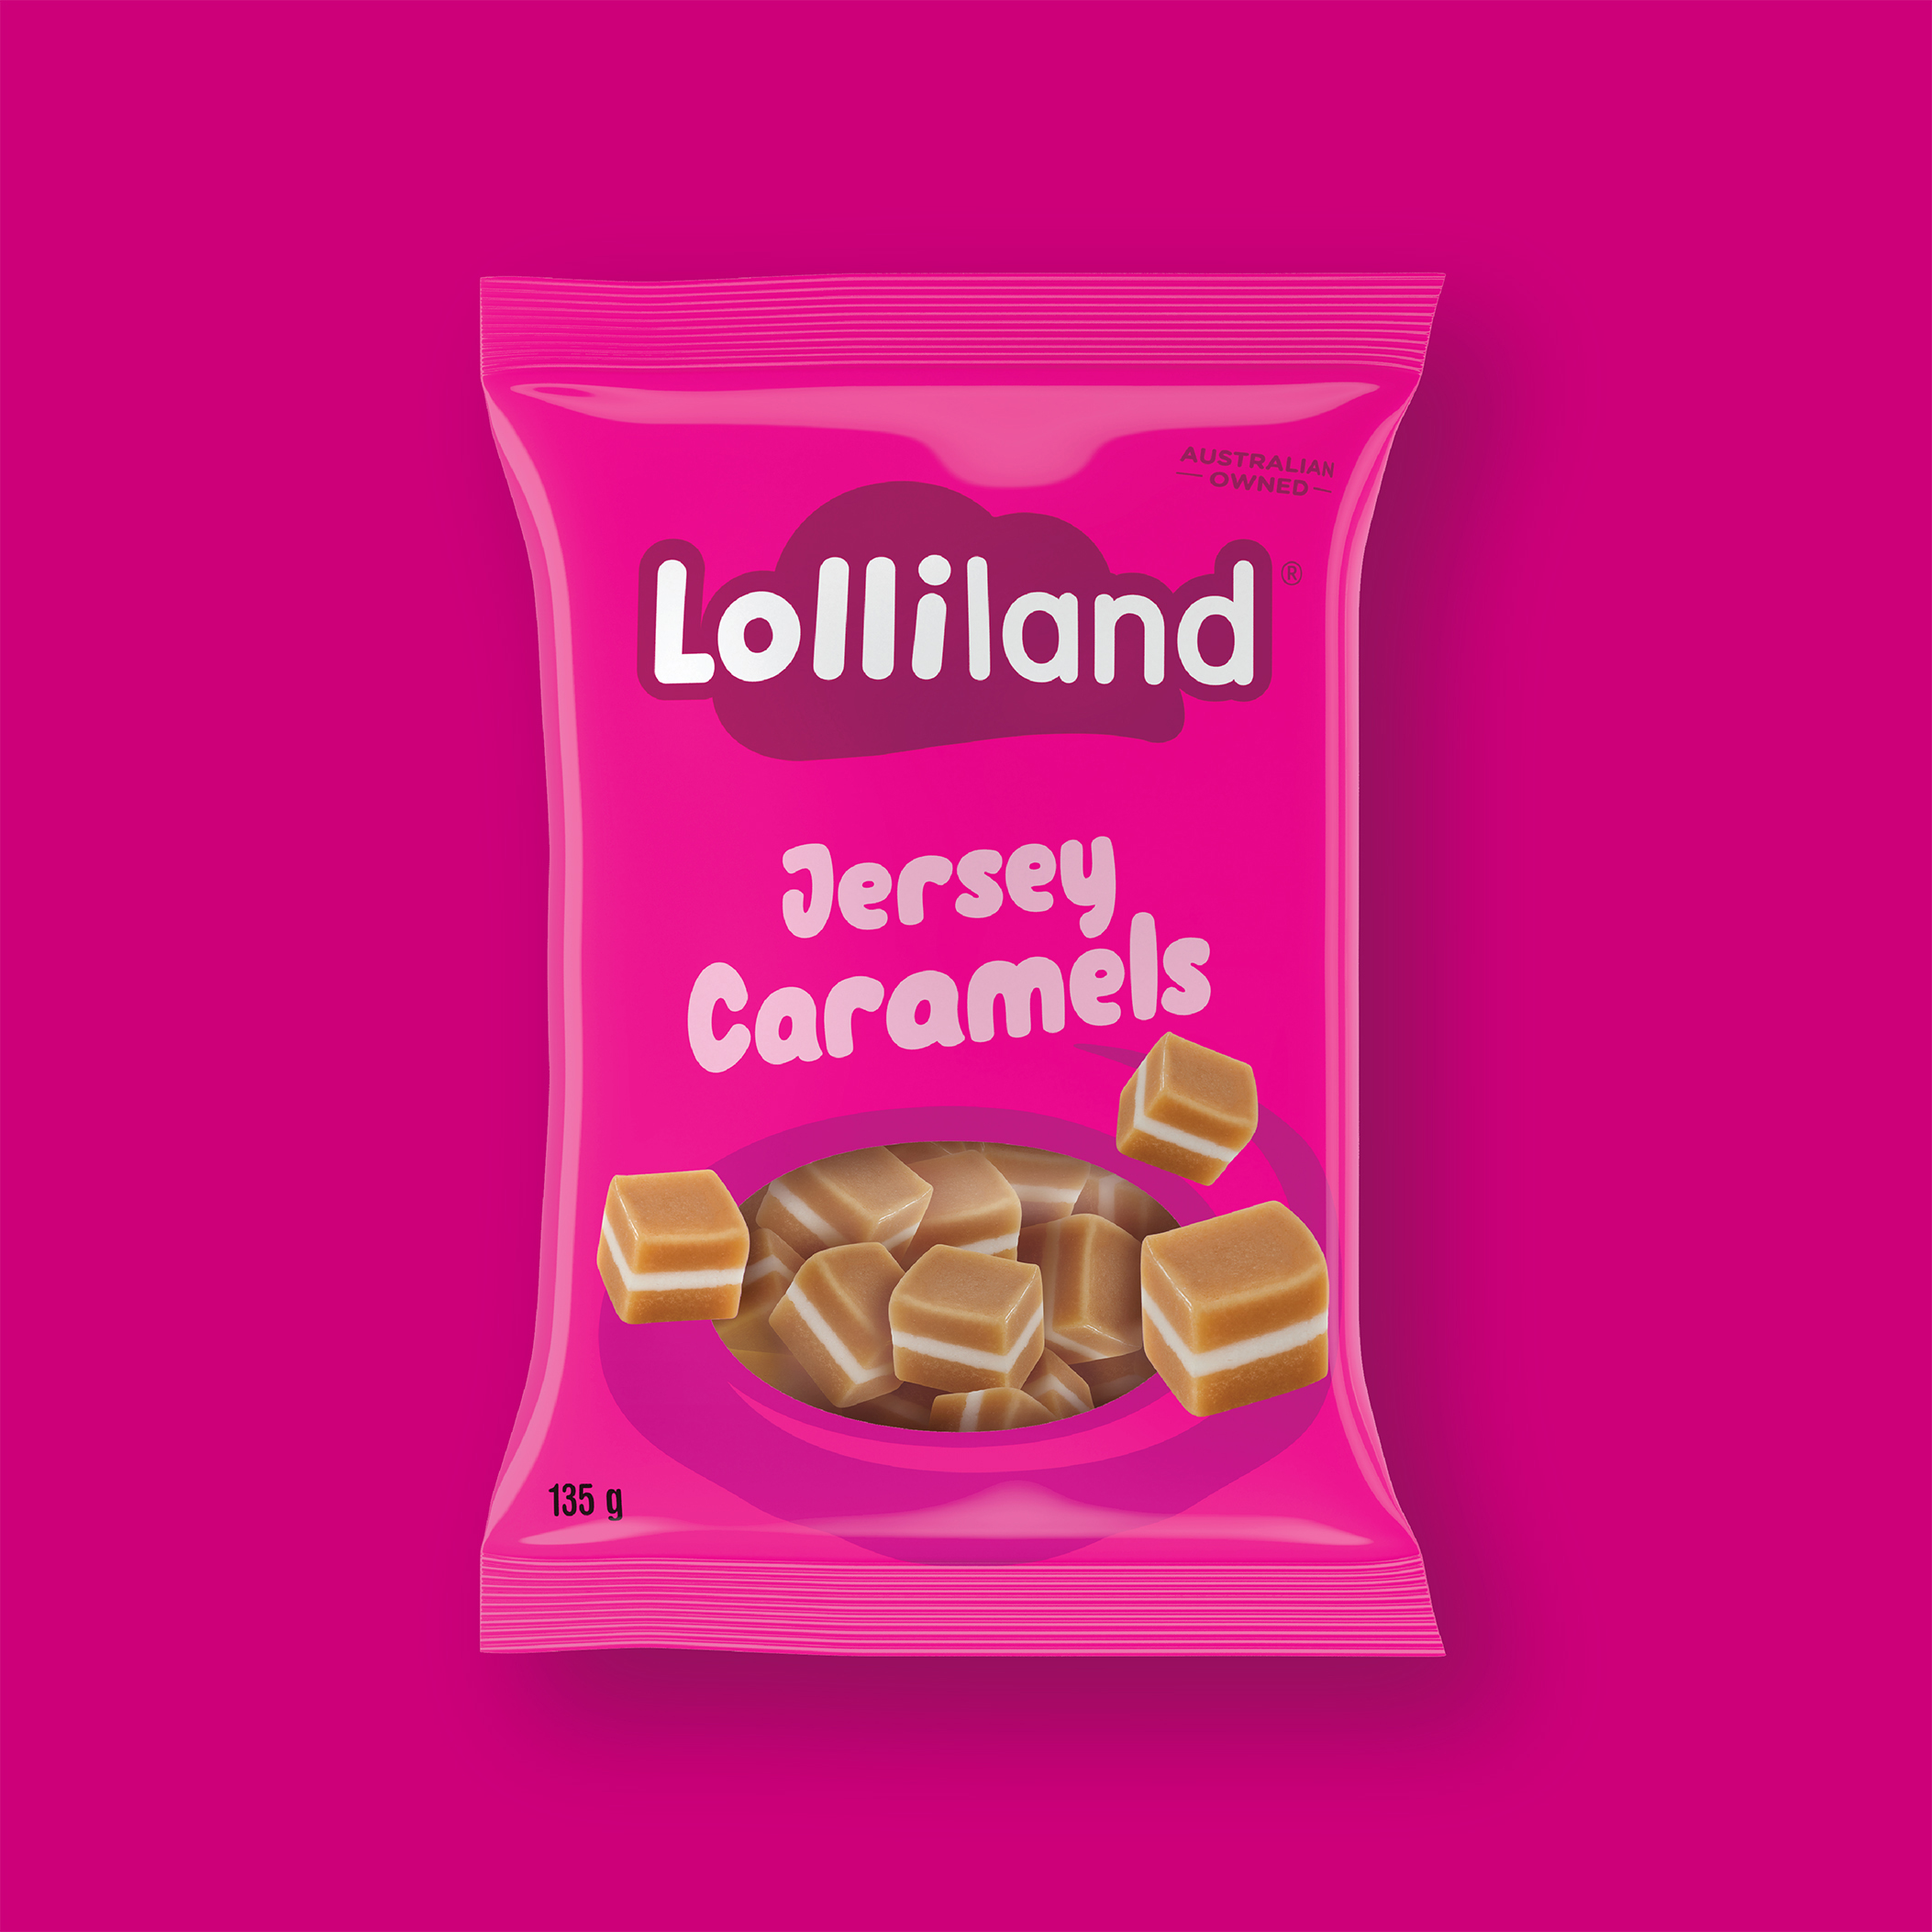 Energi Packaging Design Agency Specialists Creative Inspire Transform Lolliland Confectionery Packaging Jersey Caramels